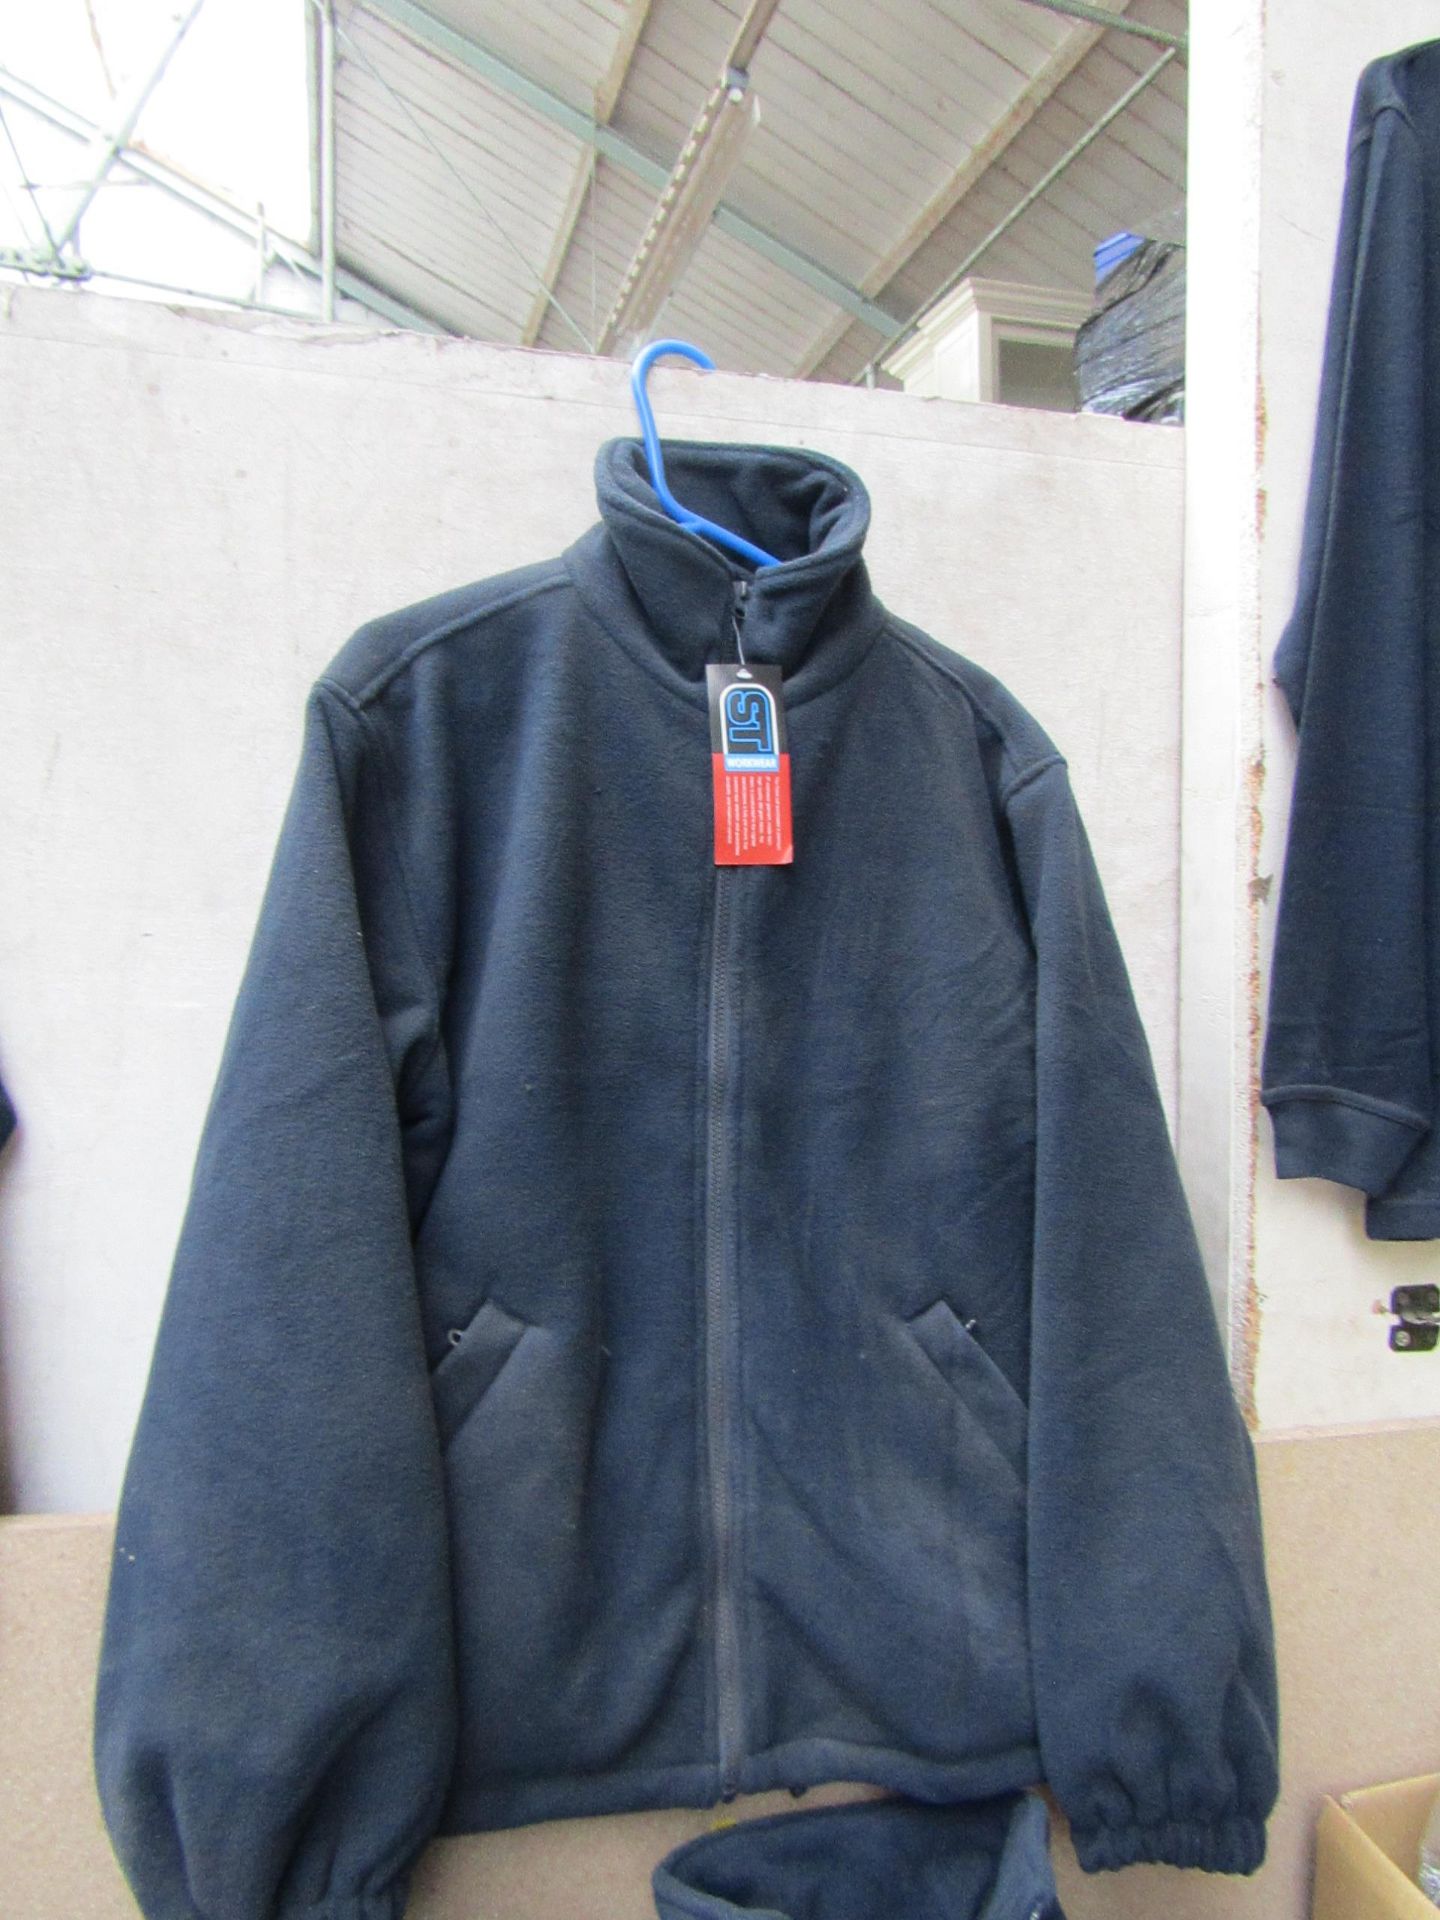 Super Touch Workwear Fleece Size S. New with tags